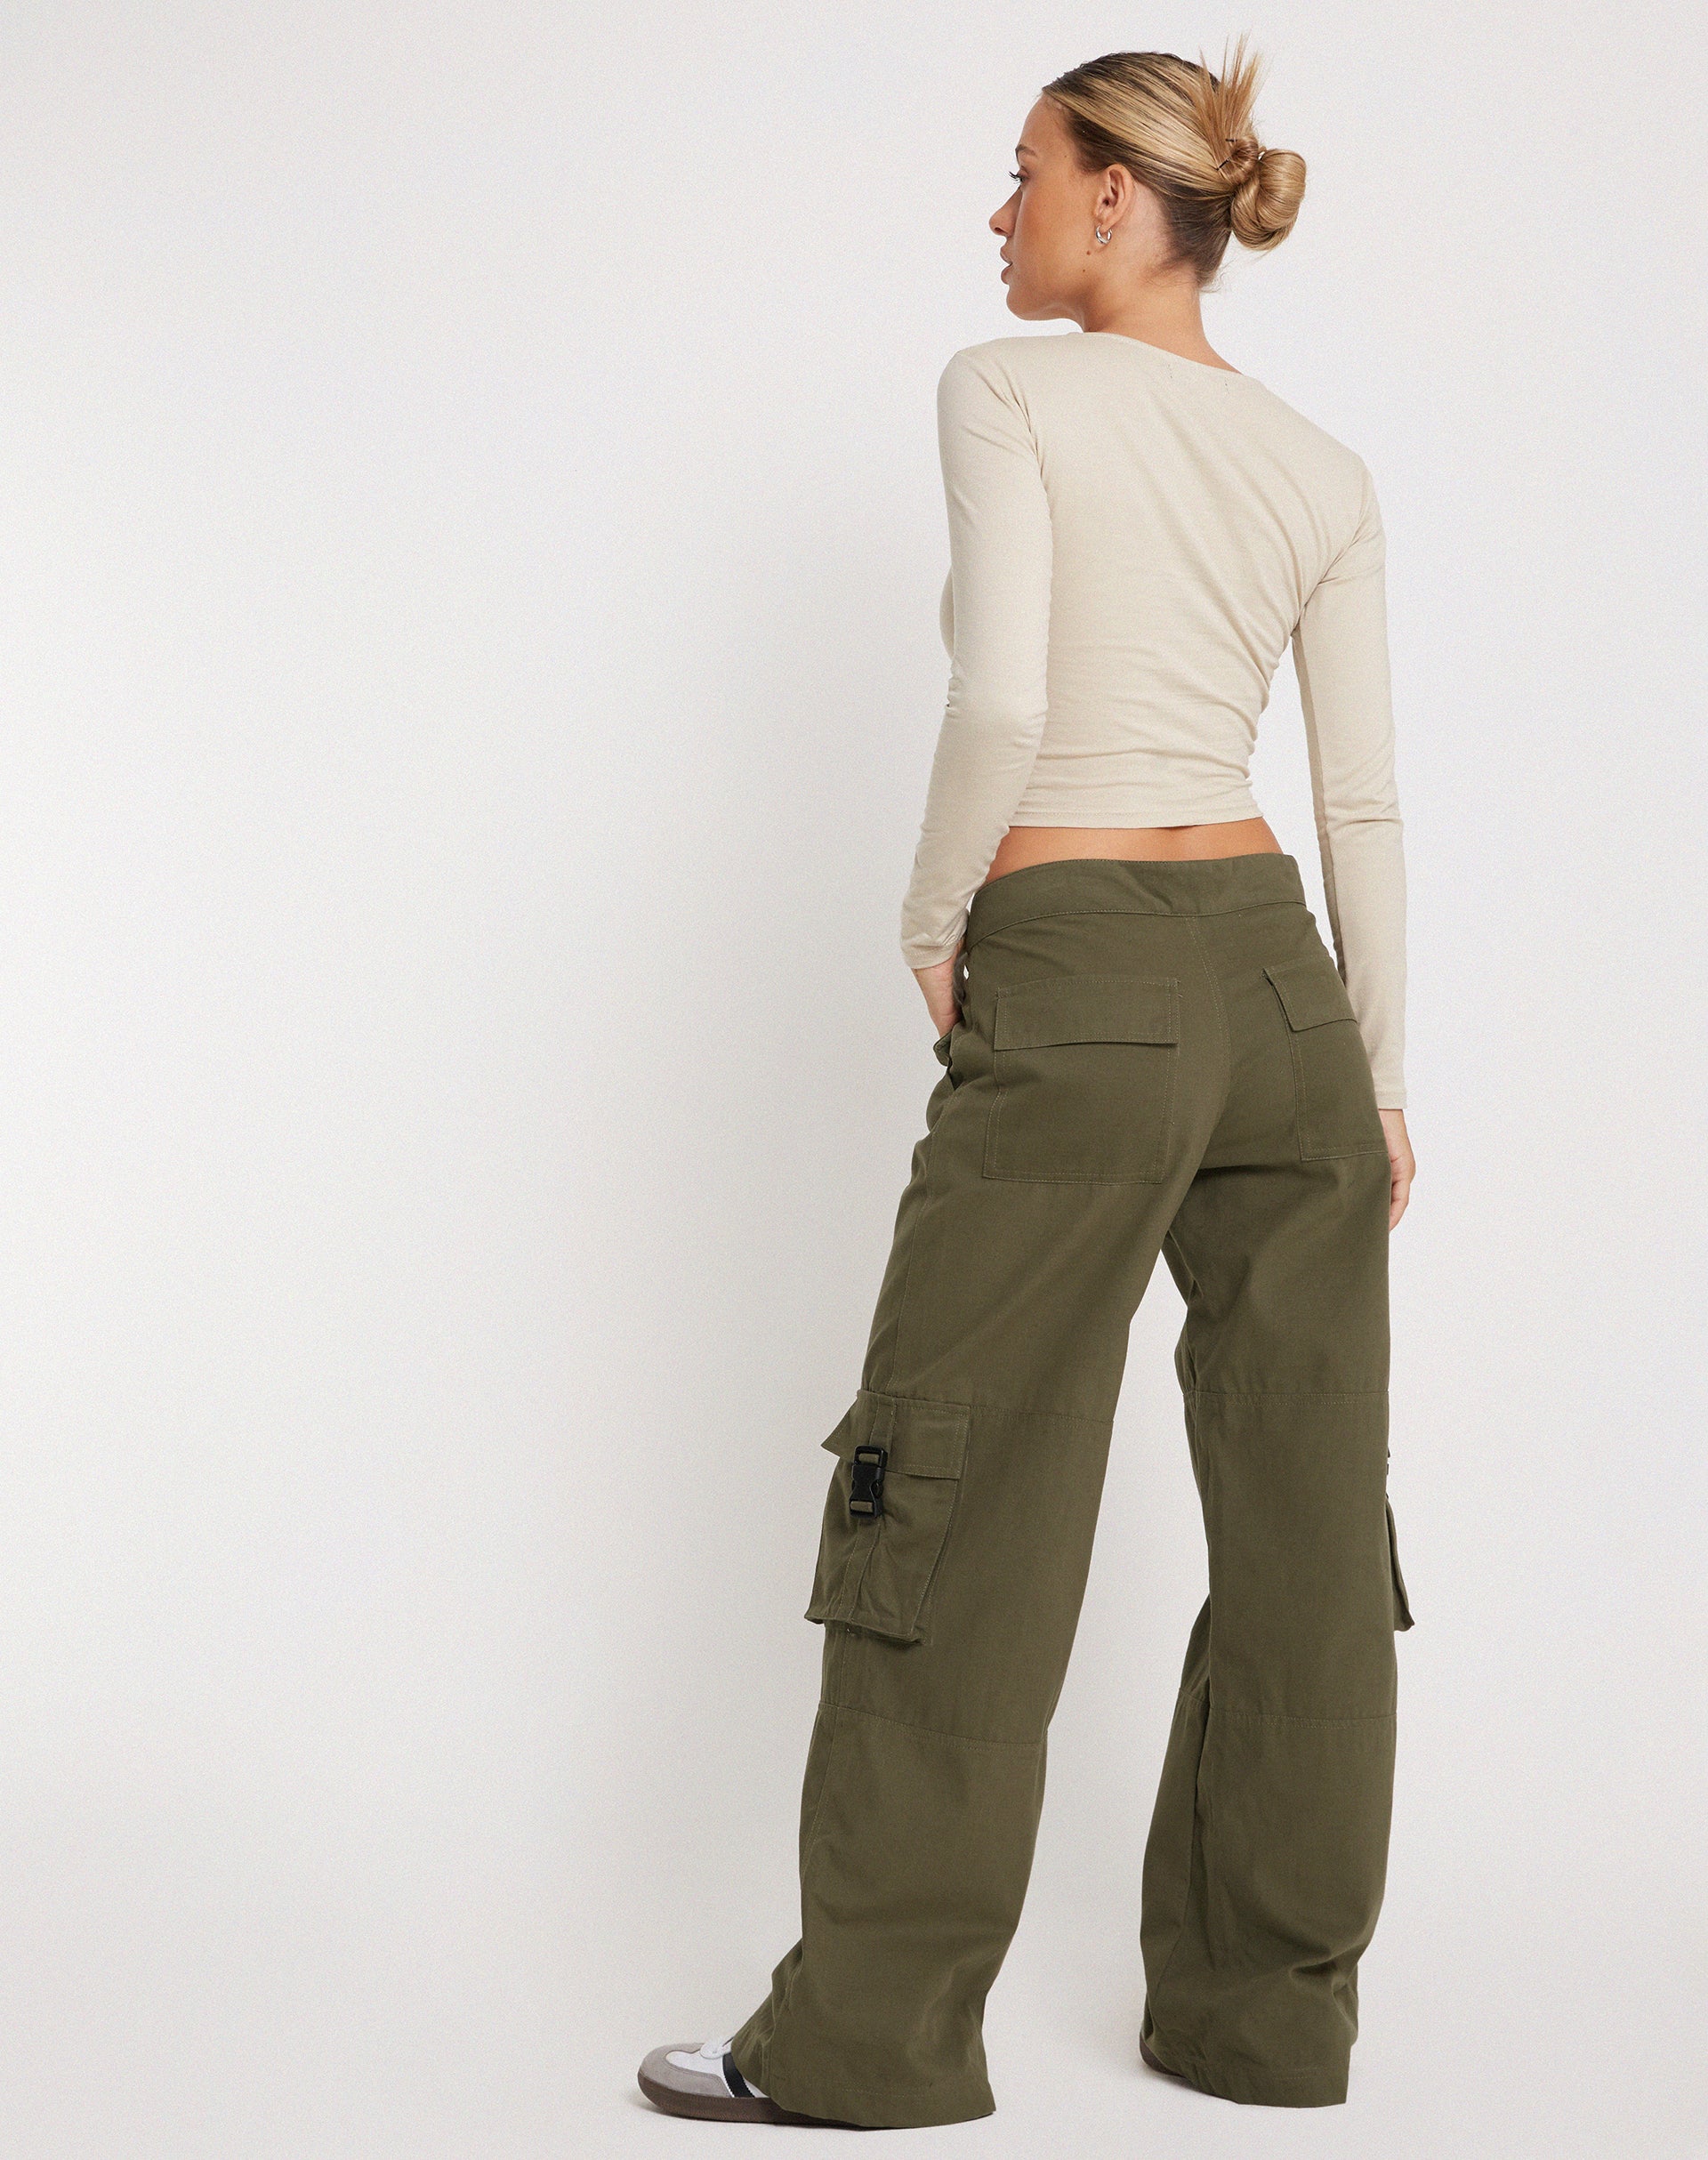 image of Freddy Low Rise Cargo Trouser in Military Khaki